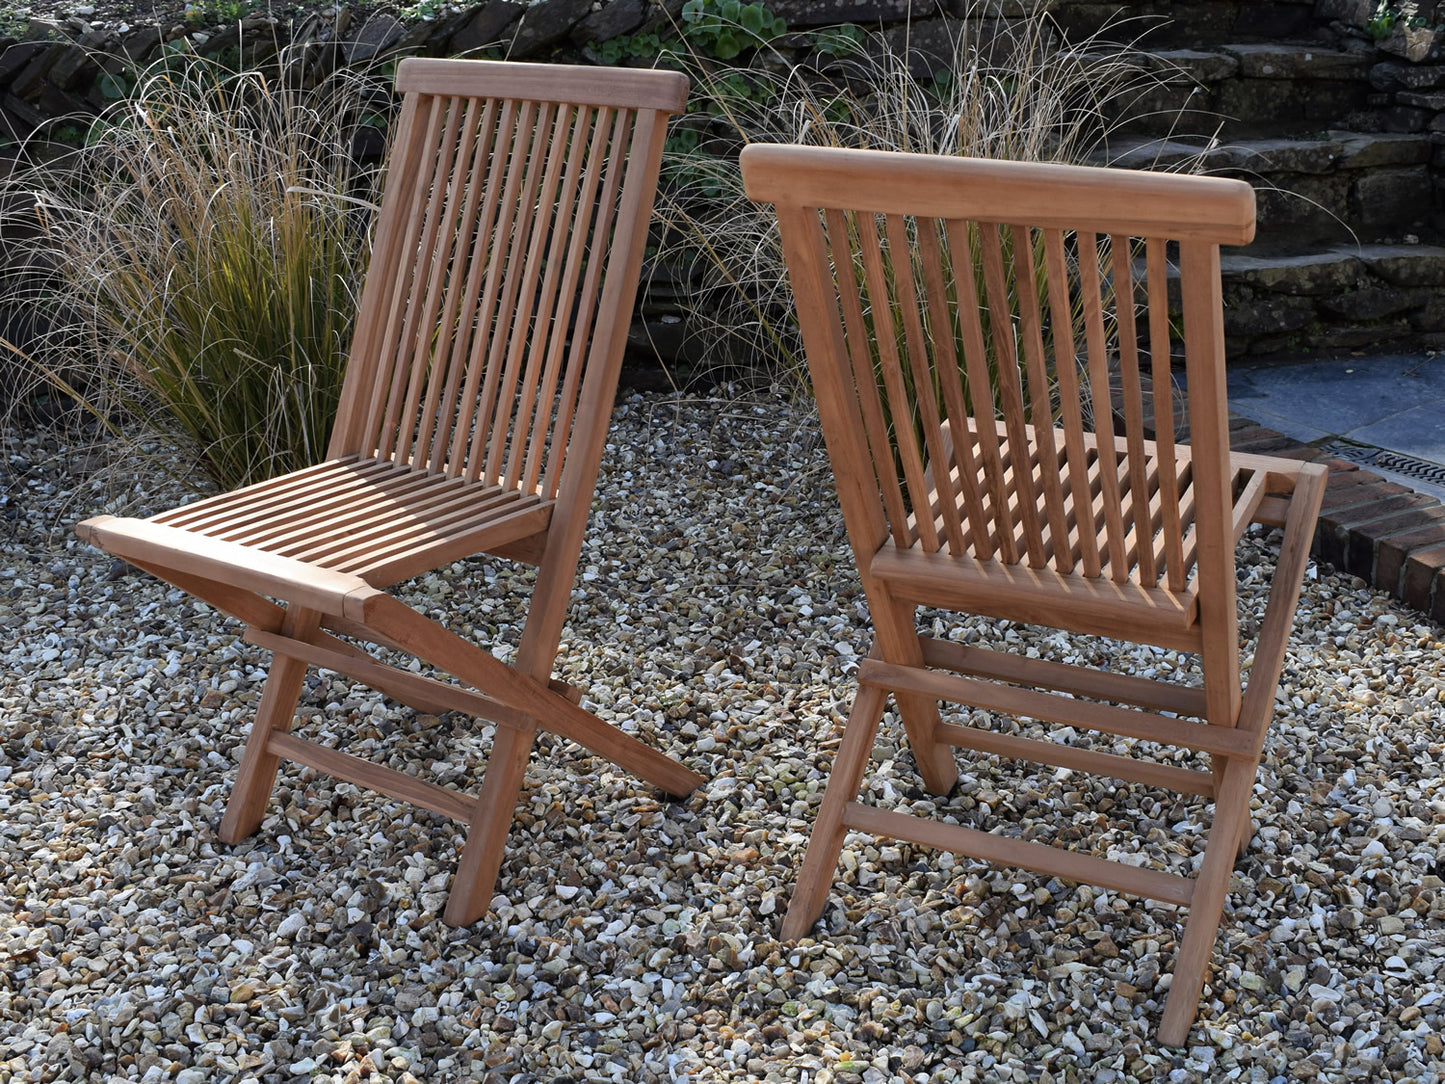 2 Seater Round Folding Teak Set with Classic Folding Chairs